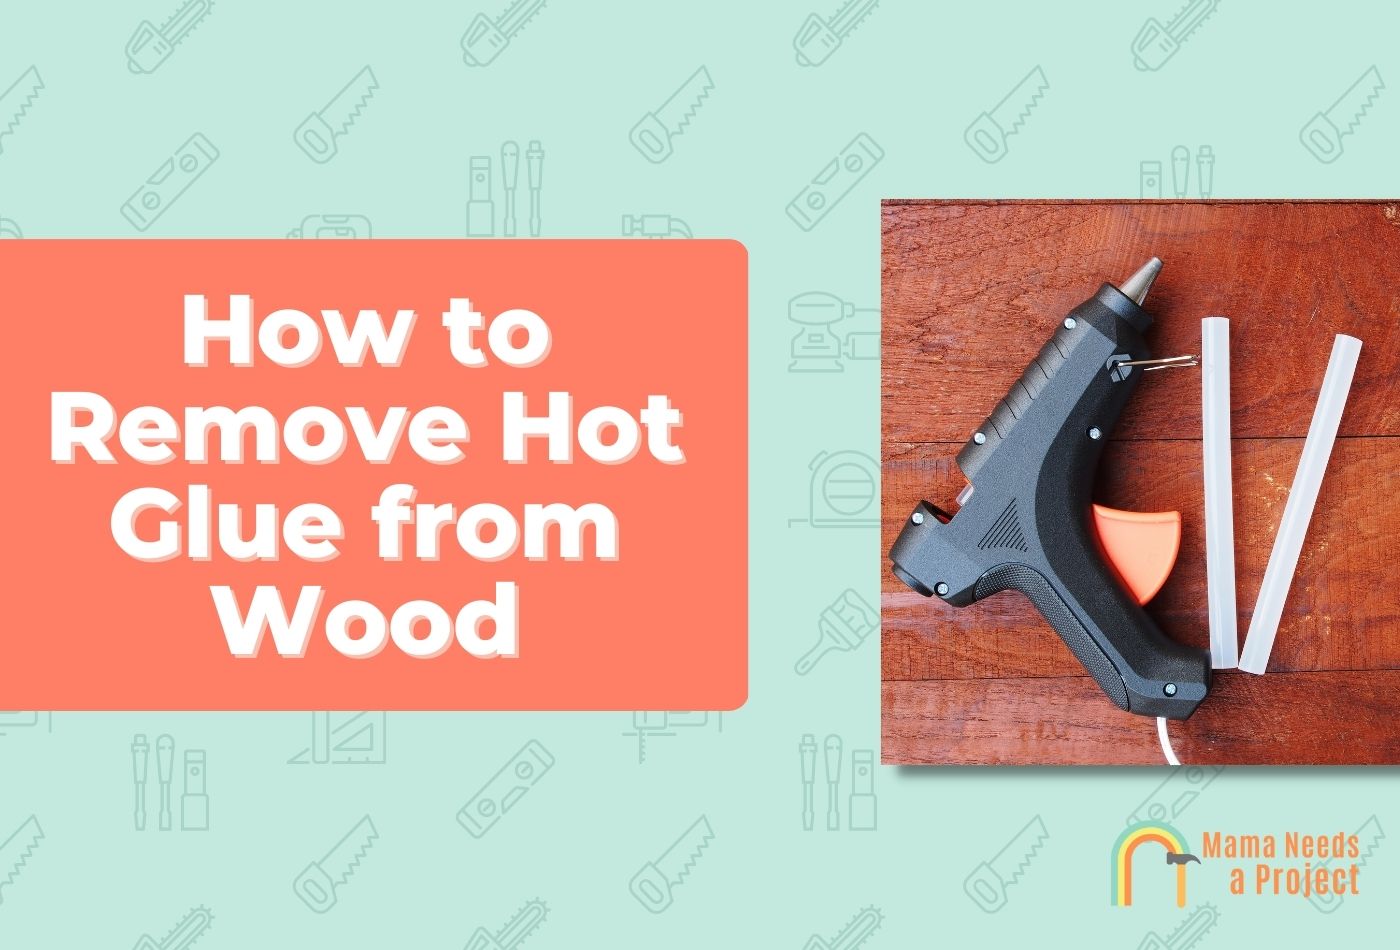 How to Remove Hot Glue from Wood